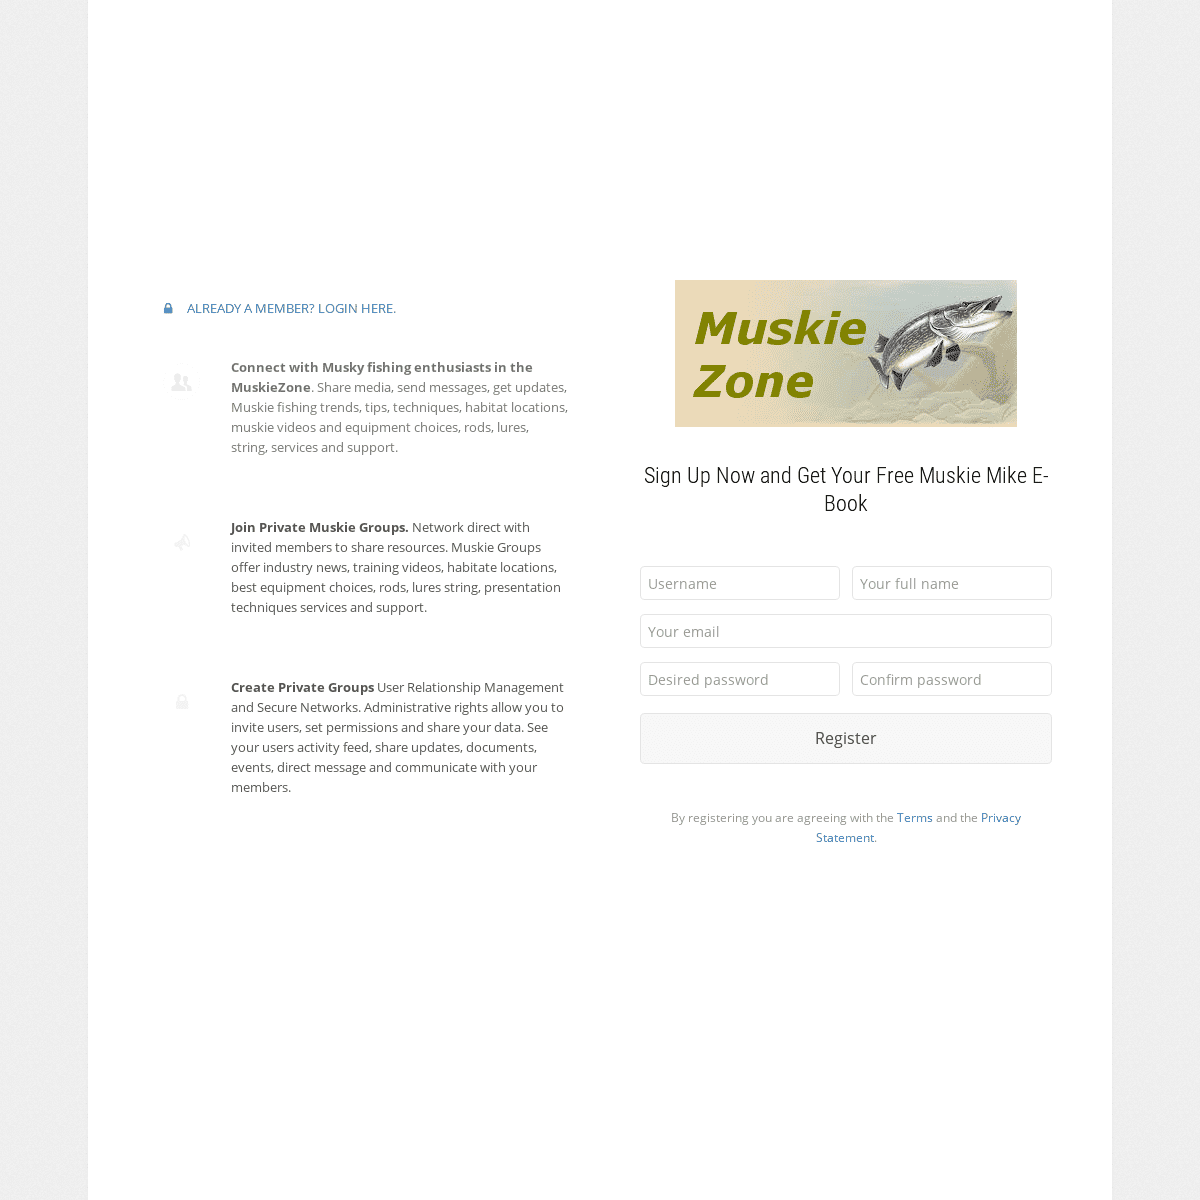 A complete backup of https://muskiezone.com